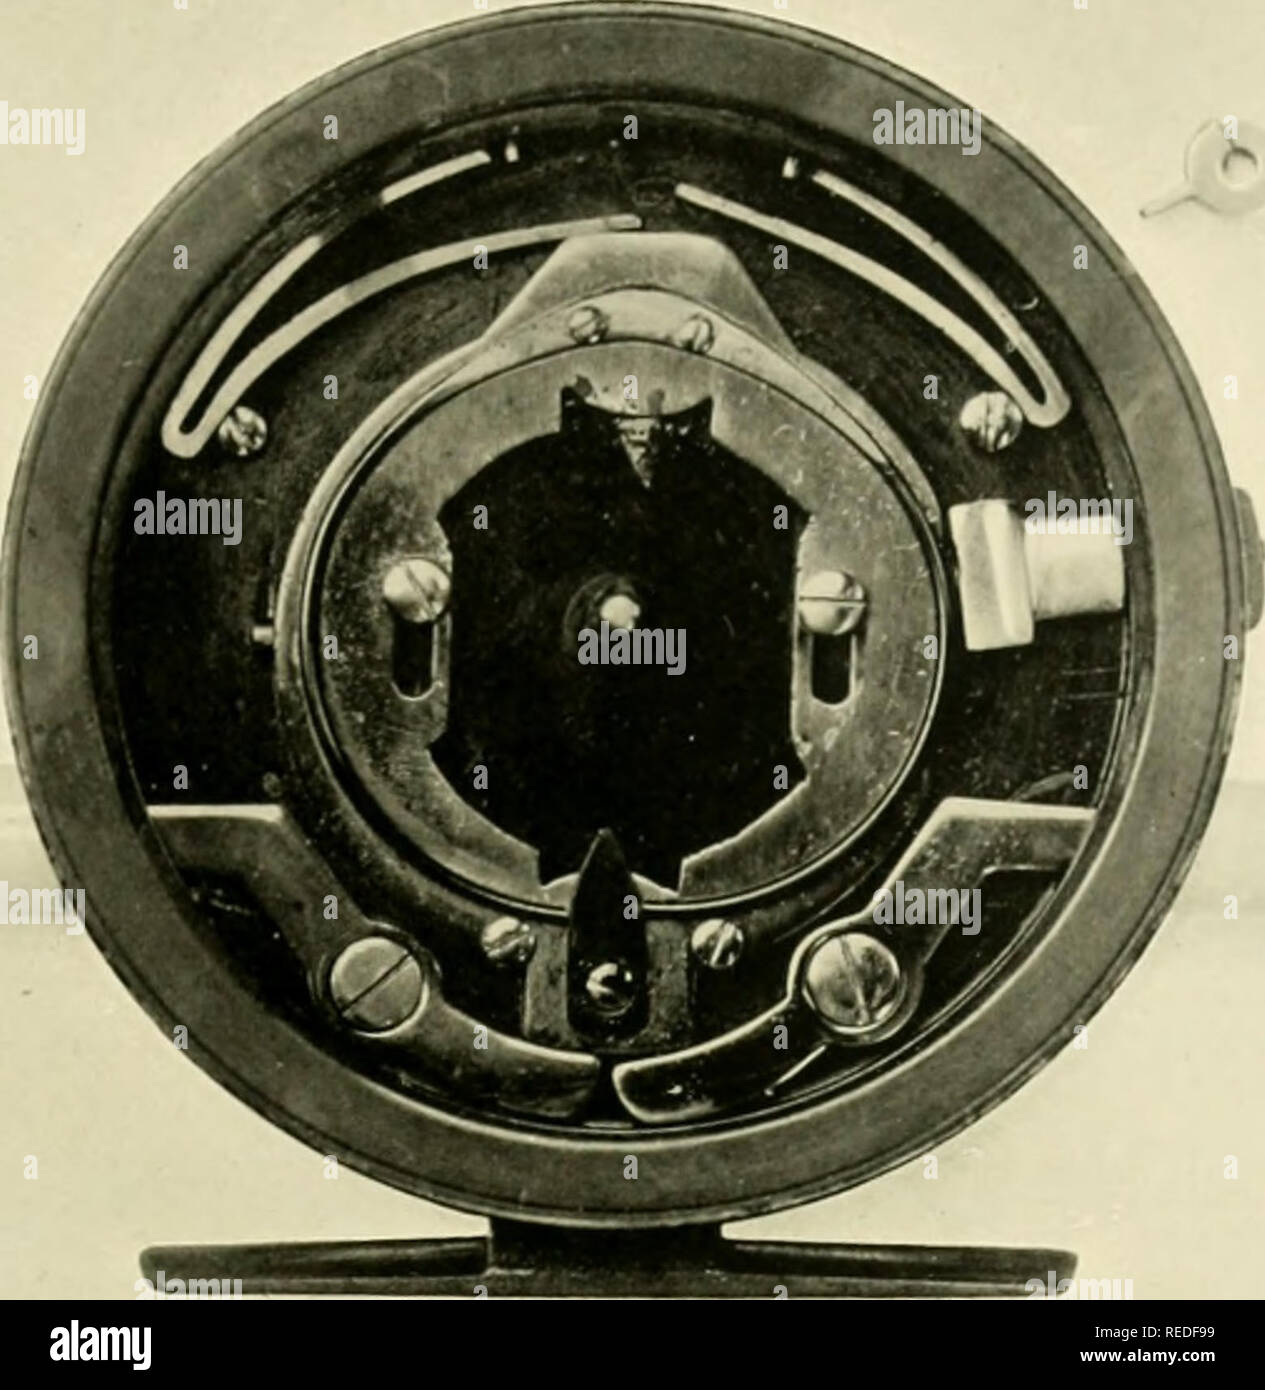 The complete science of fly fishing and spinning. Fly-casting. [from old  catalog]. PLATE LX.. FIG. A.—PLAN SHOWING INTERIOR MECHANISM OF THE FRED G.  SHAW SPINNING REEL. THE TWO PAWLS, SLIDING PLATE